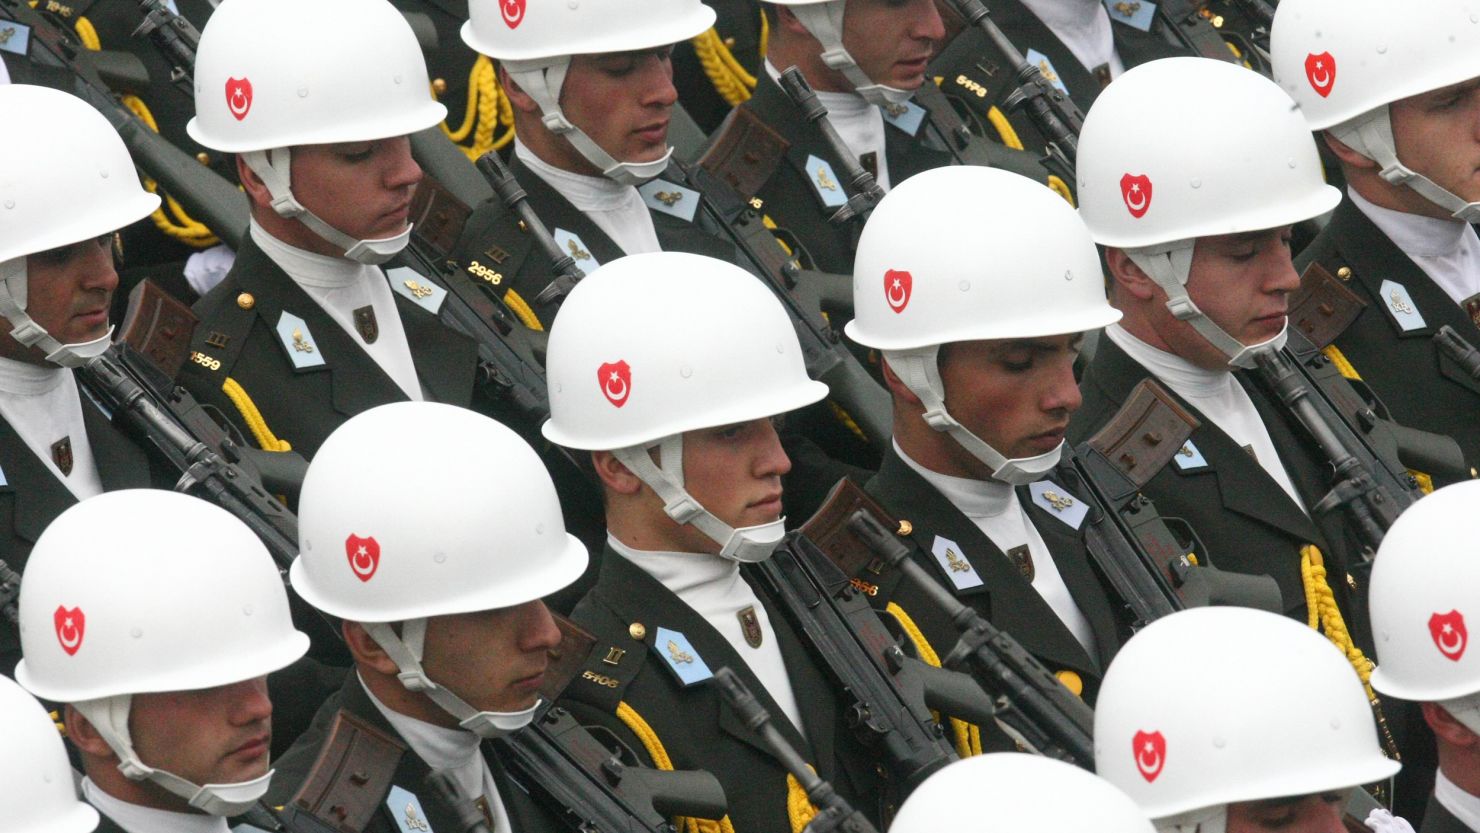 Turkish soldiers march during celebrations marking the 87th anniversary of Republic Day in Ankara on October 29, 2010